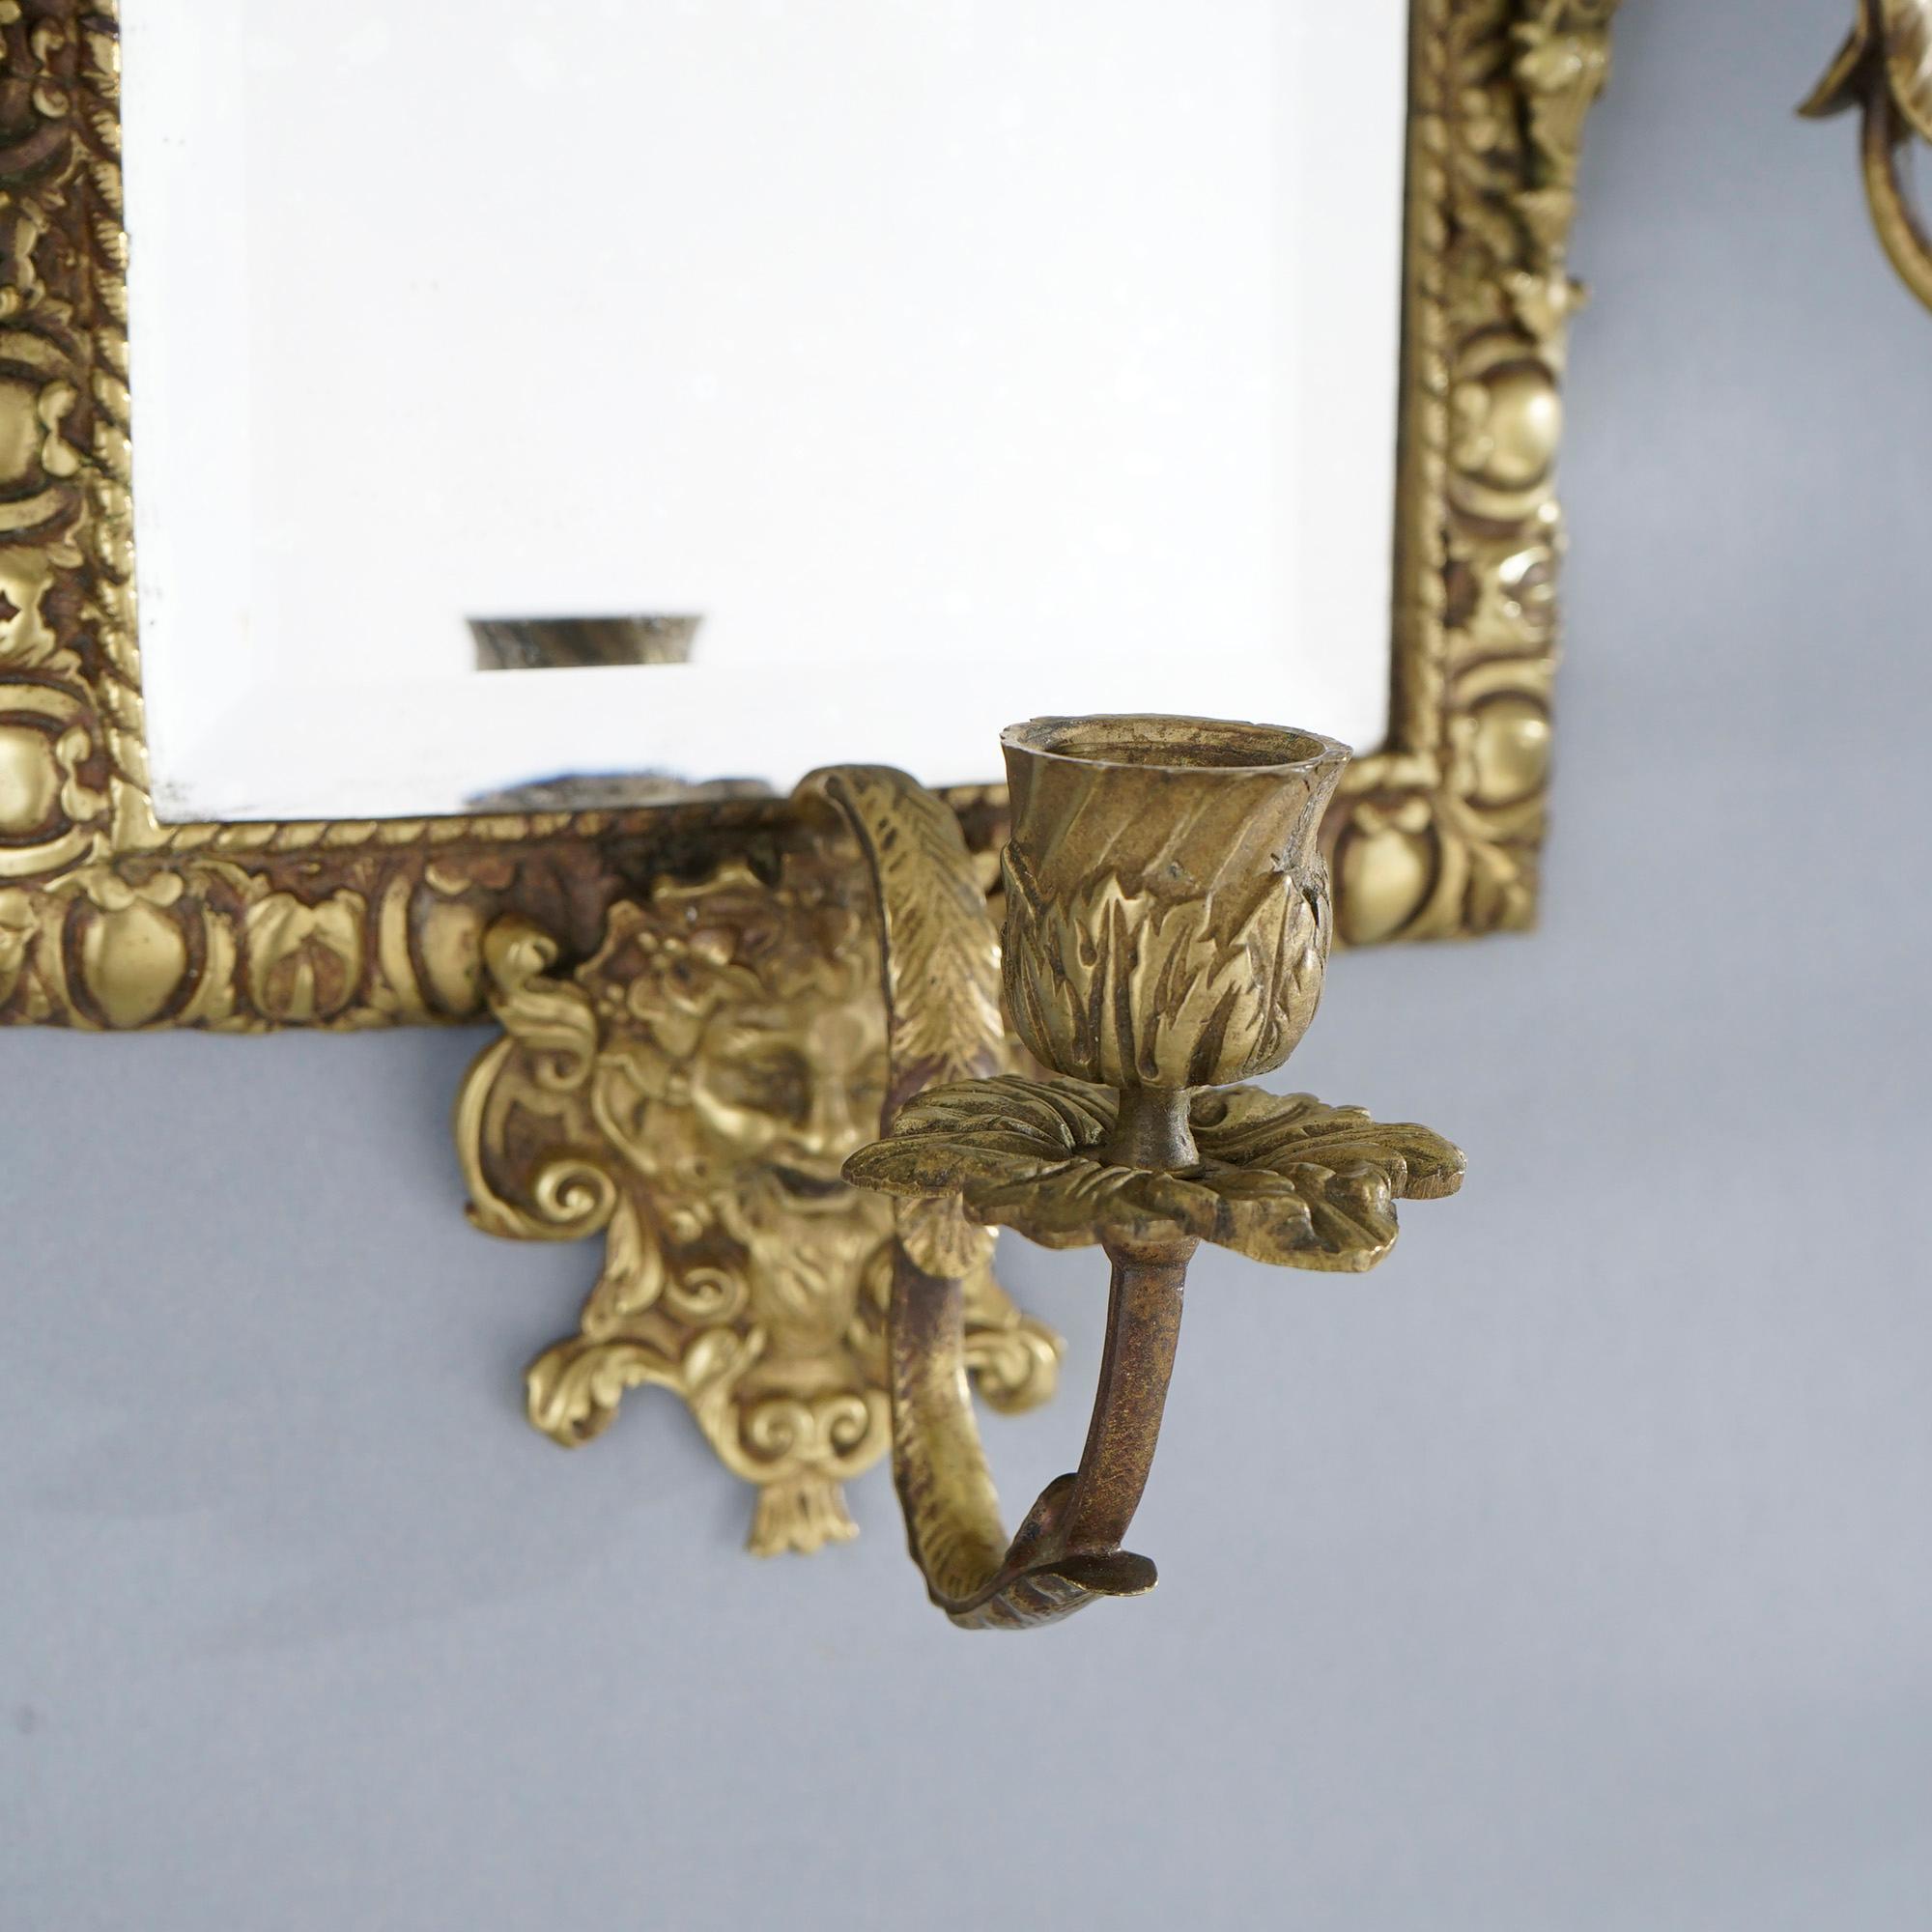 Pair Antique Victorian Mirrored Figural Gilt Metal Wall Sconces with Masks 19thC 4